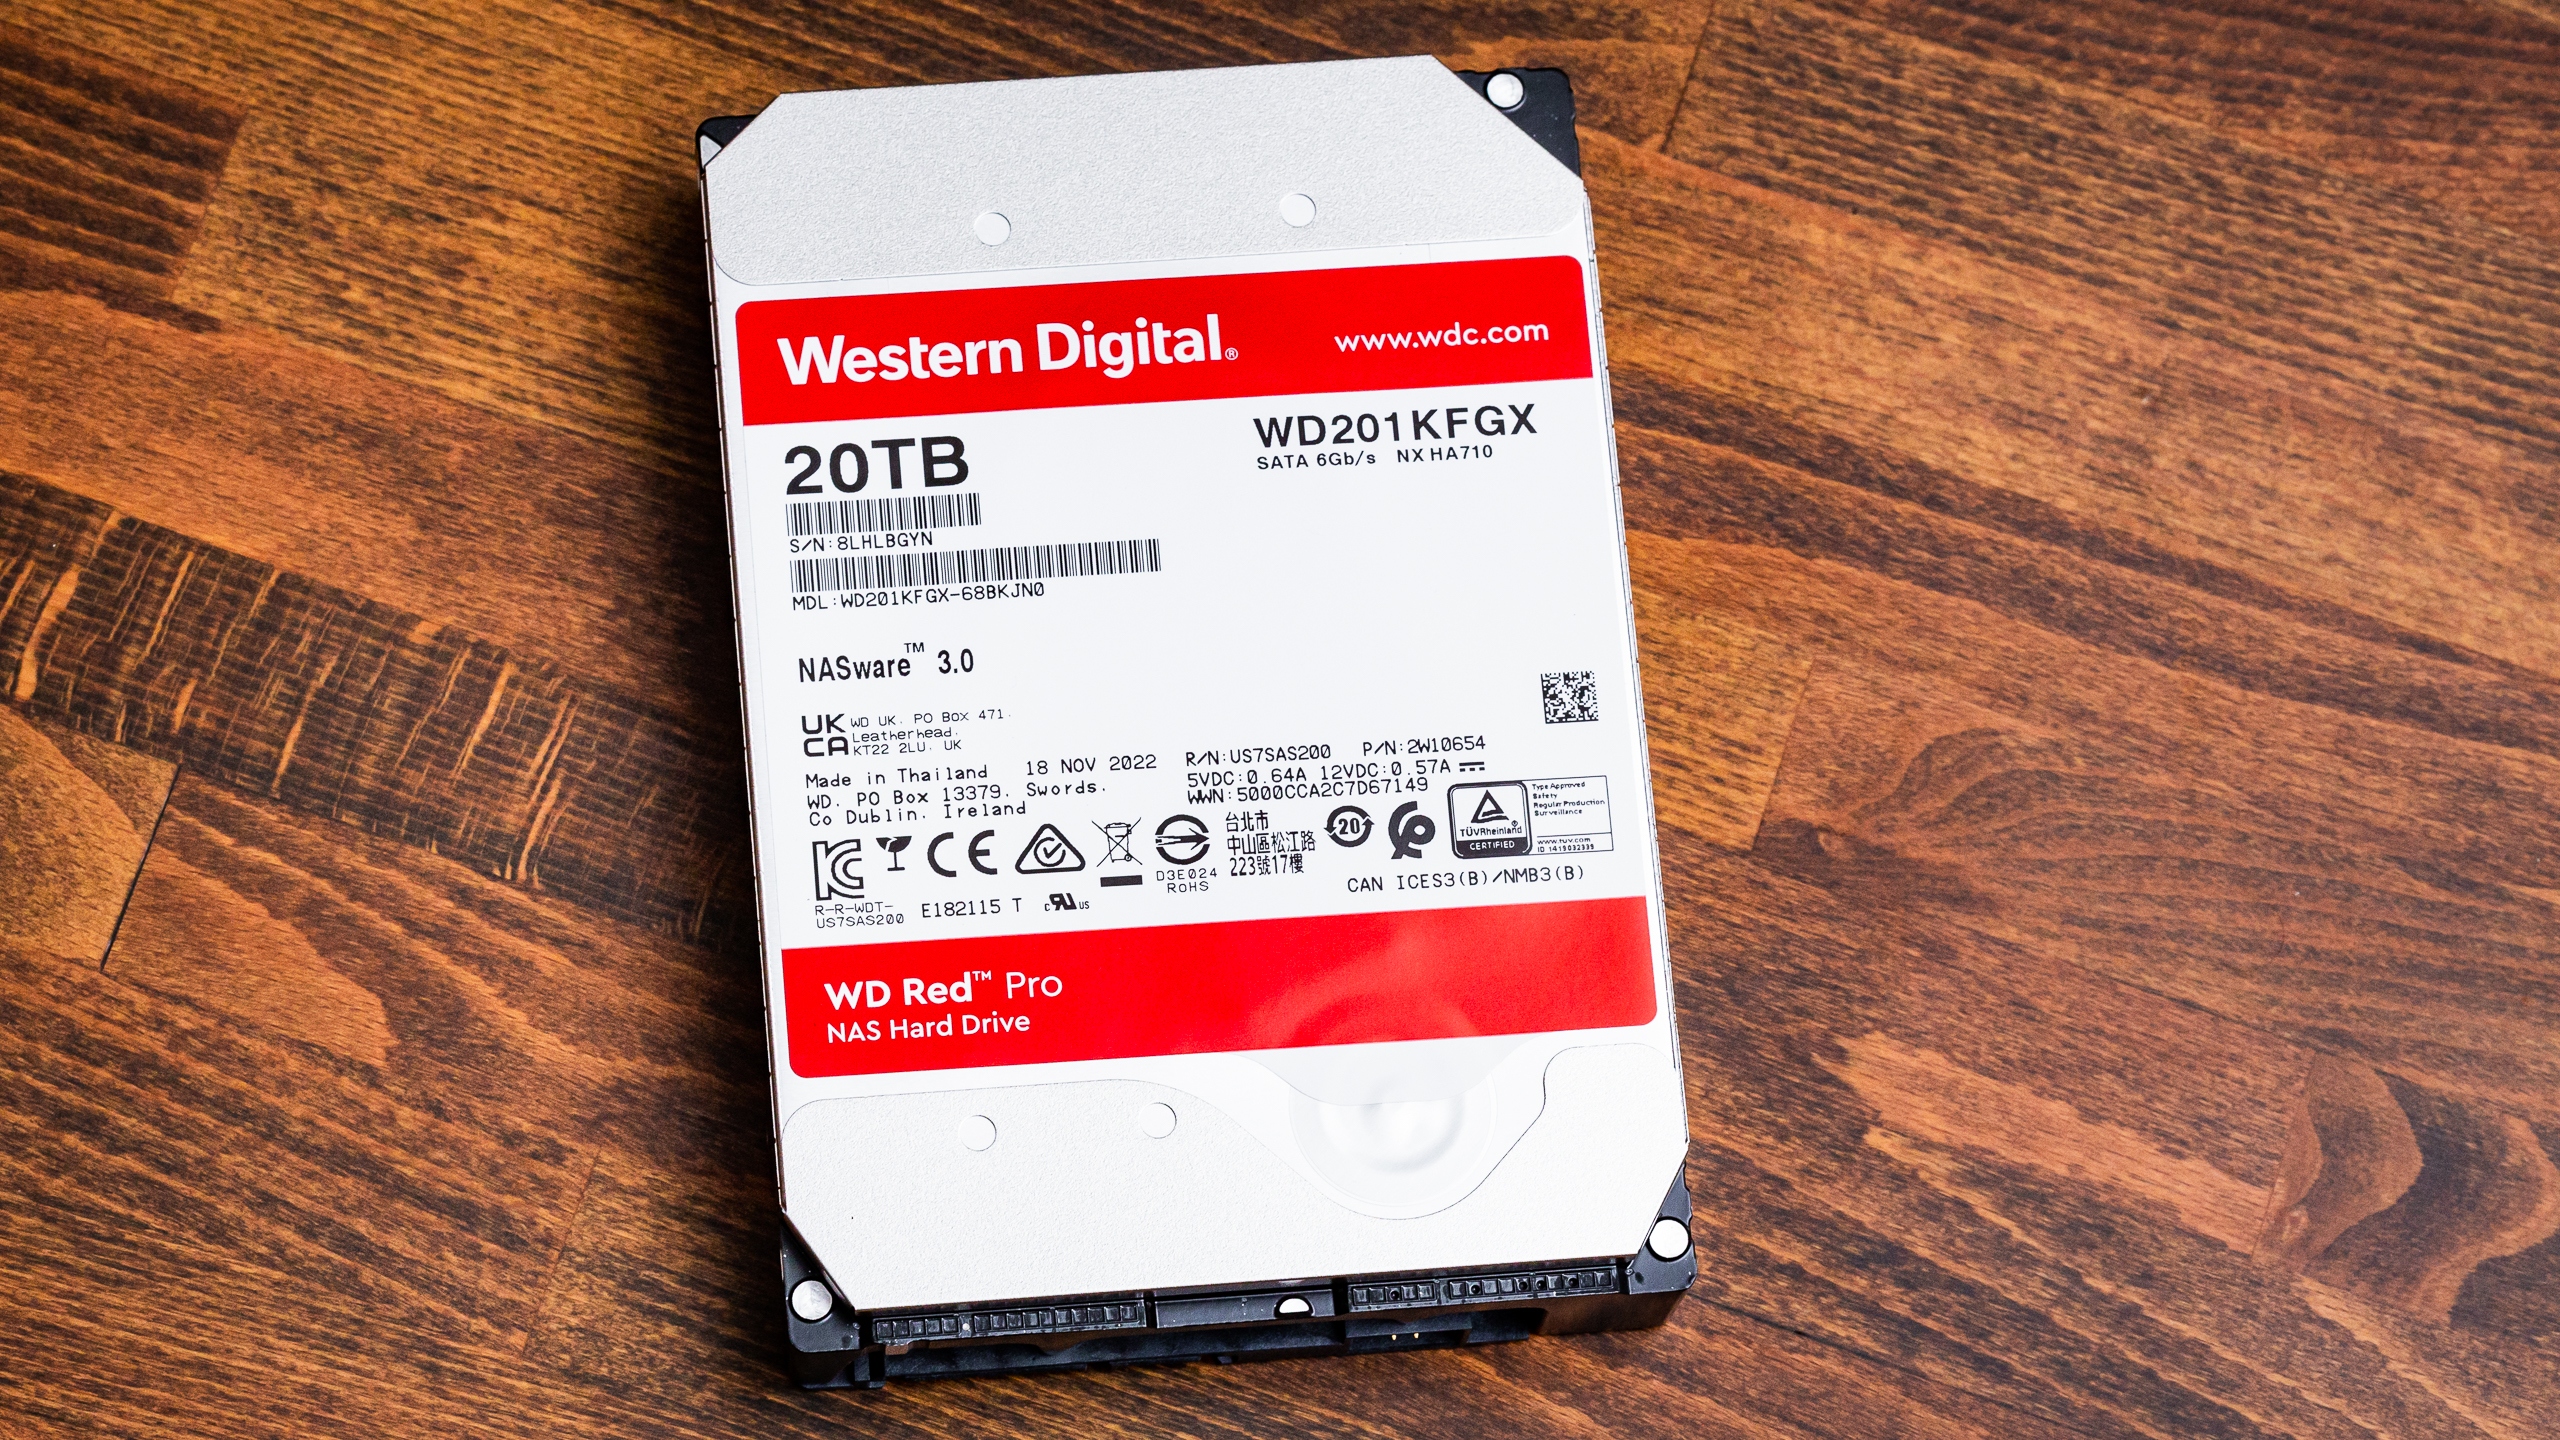 Compare WD Red Plus vs Red Pro - when you should you it? - Consumer Reviews